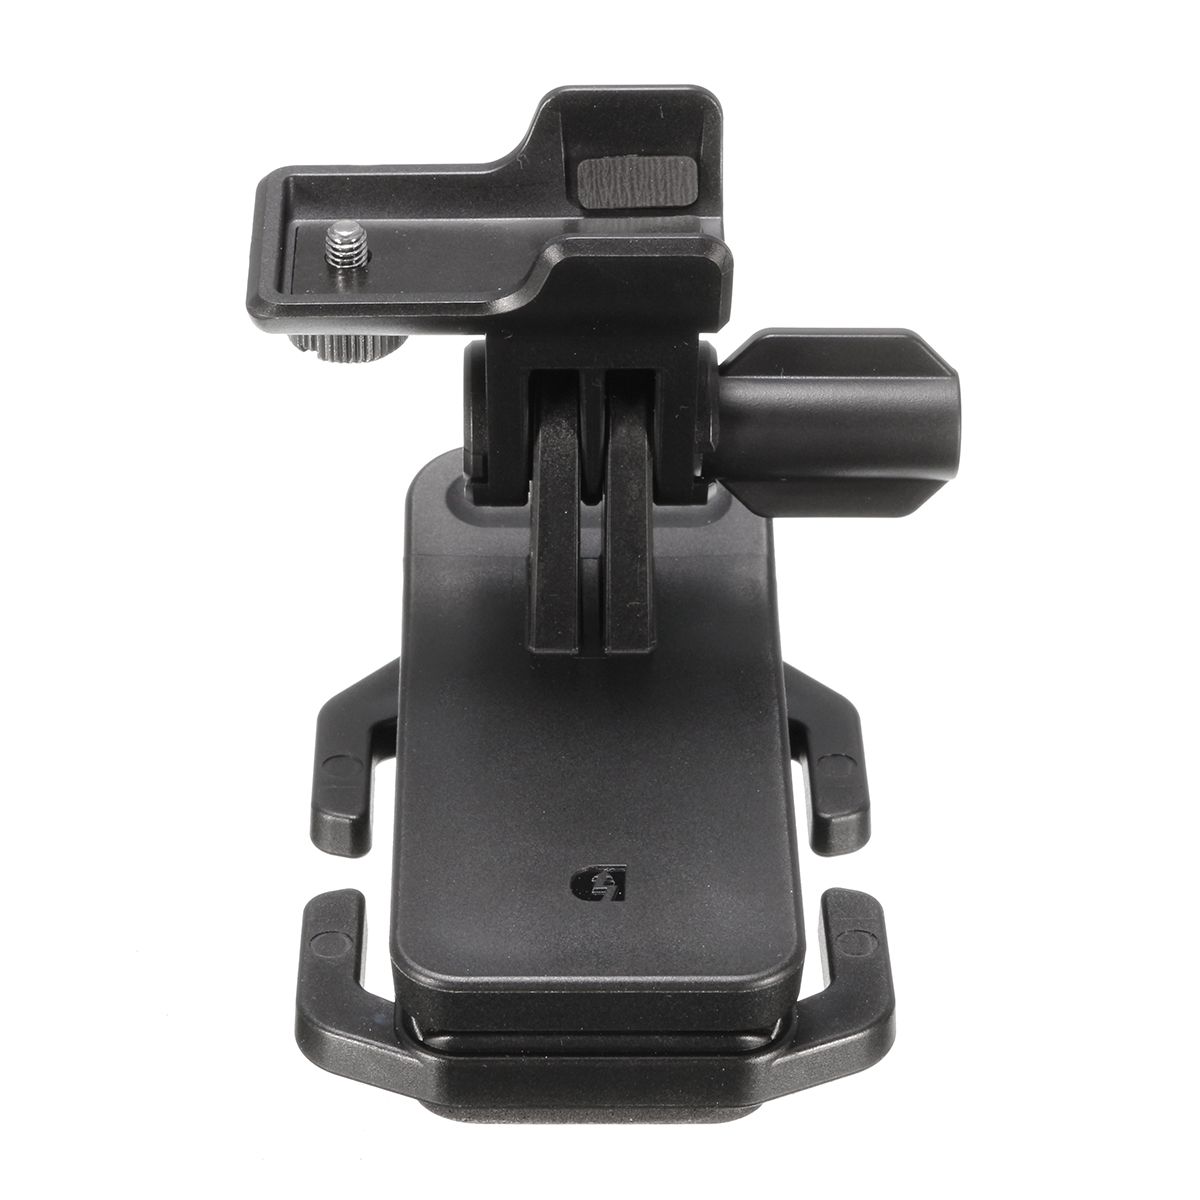 Head-Strap-Clip-Mount-Kit-For-Sony-Action-Cam-HDR-AZ1-FDR-X1000VR-As-BLT-CHM1-1220315